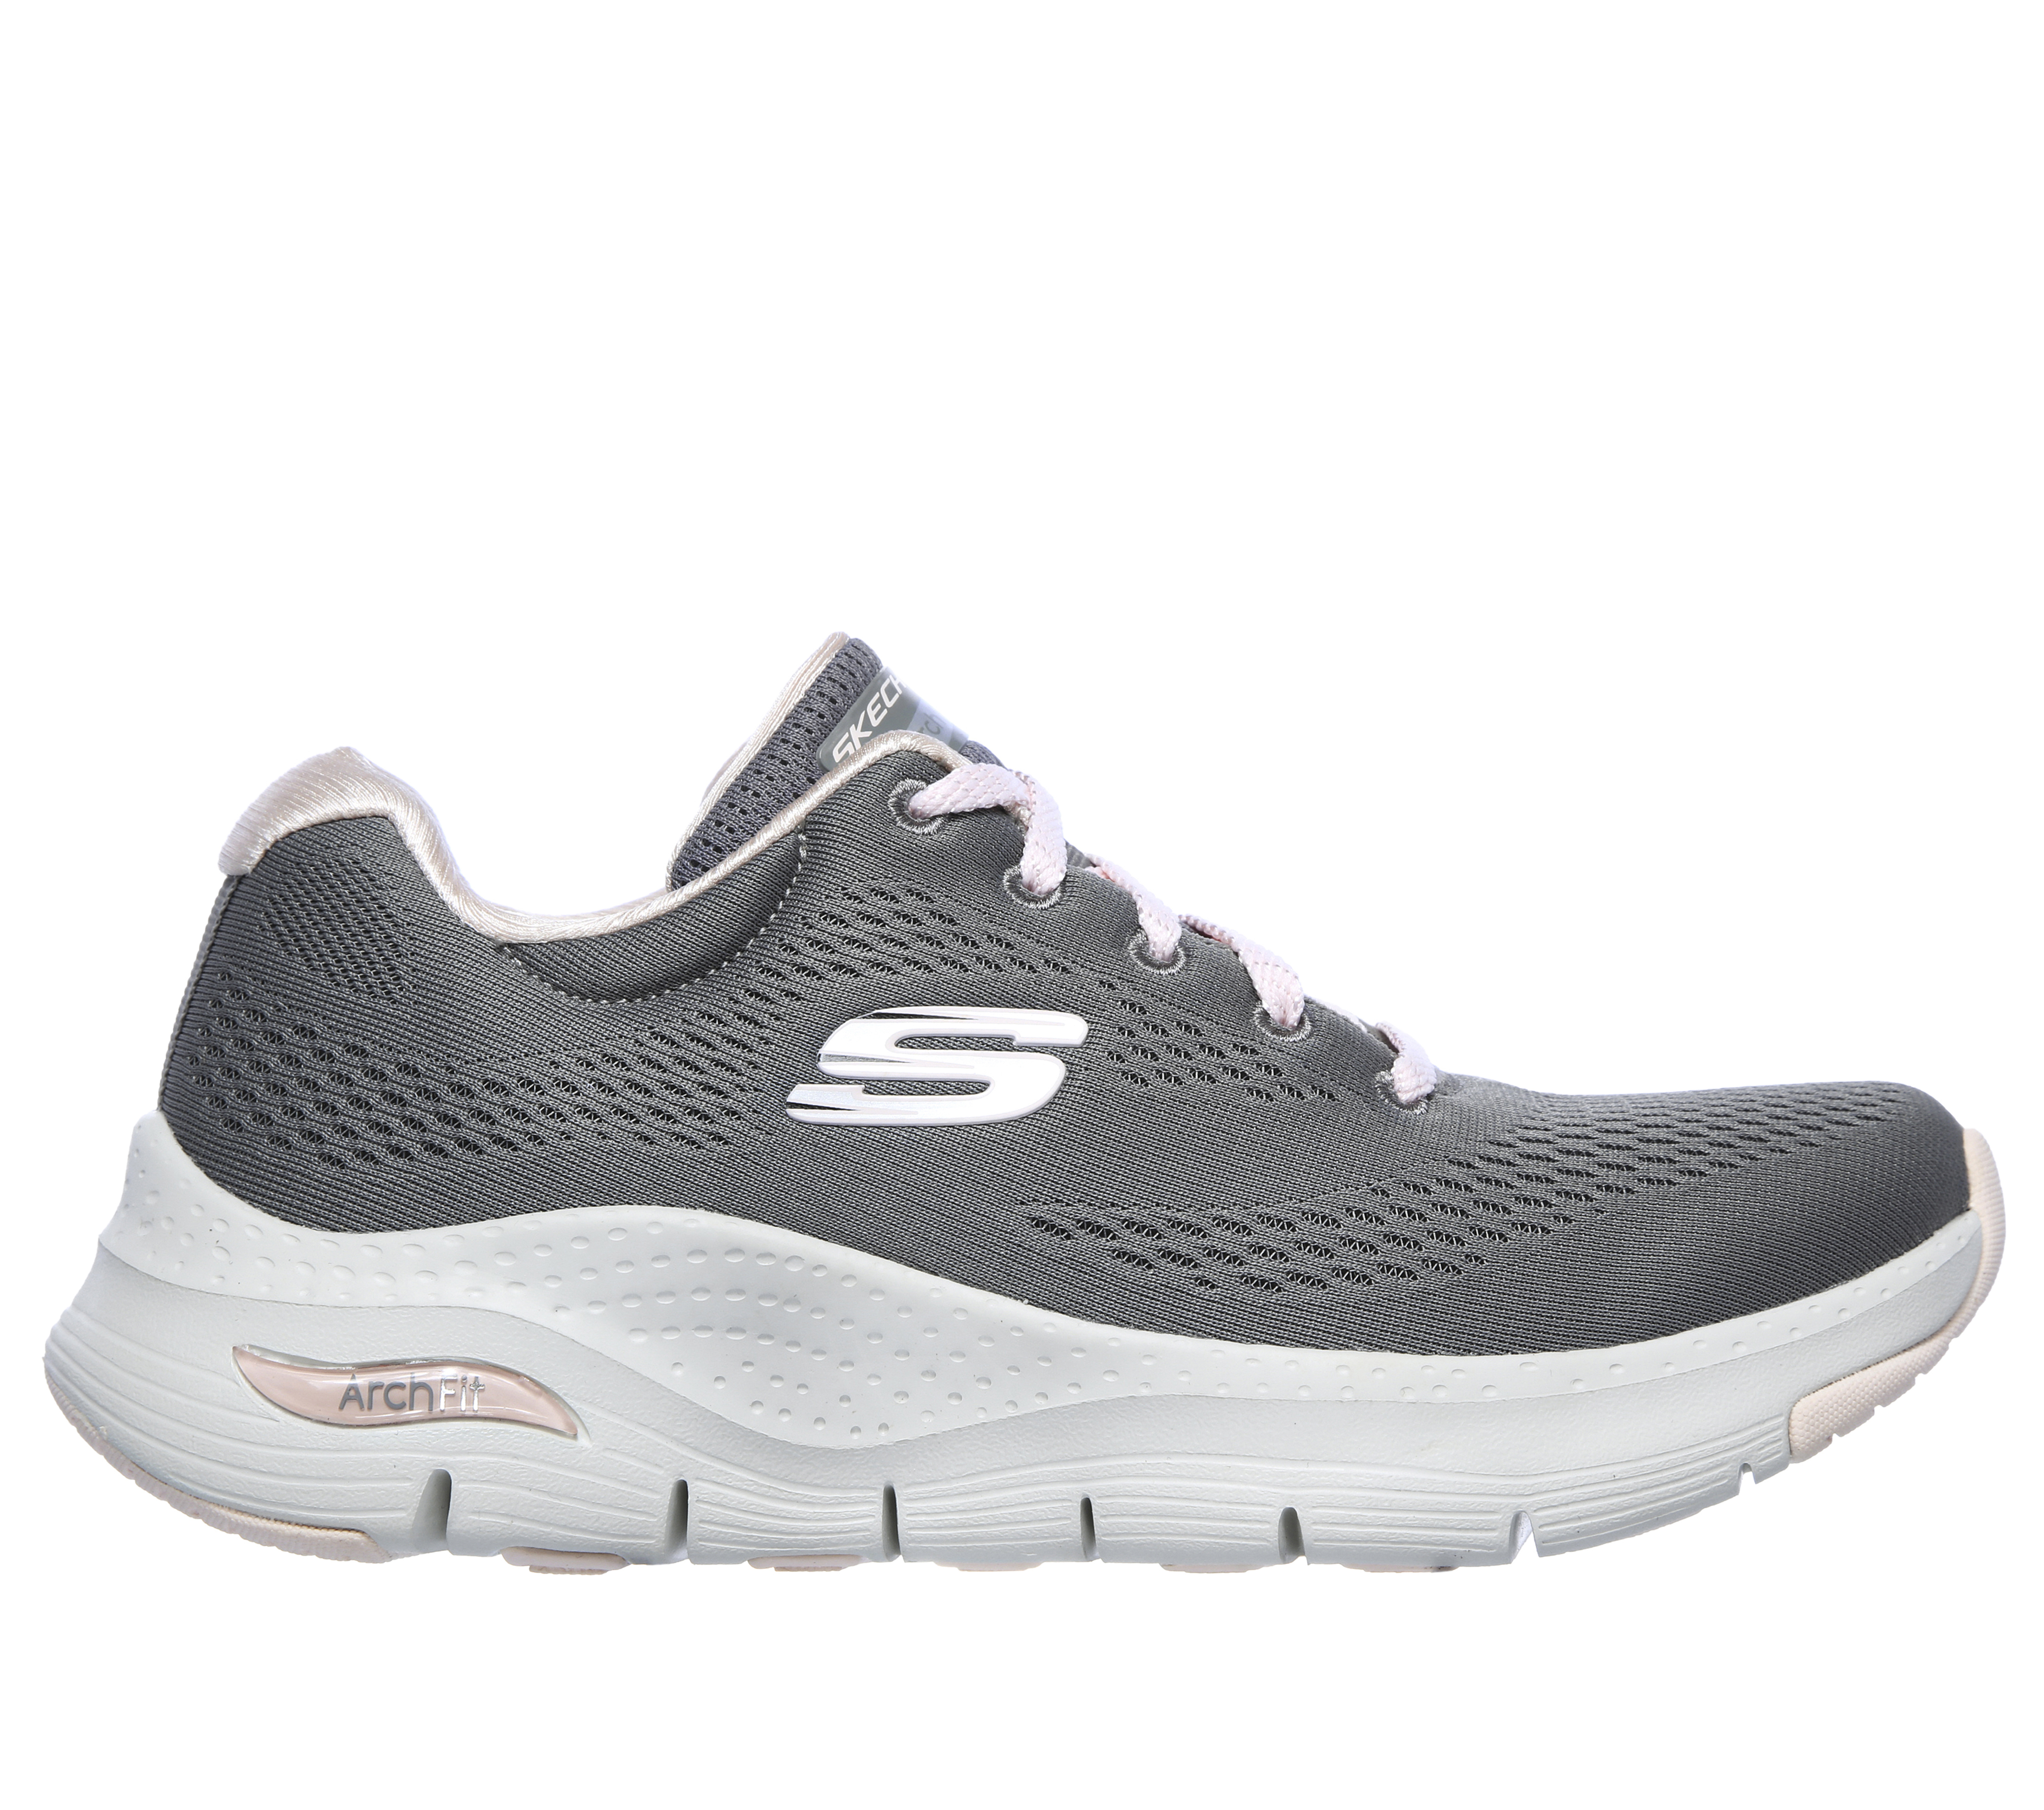 sketchers without laces